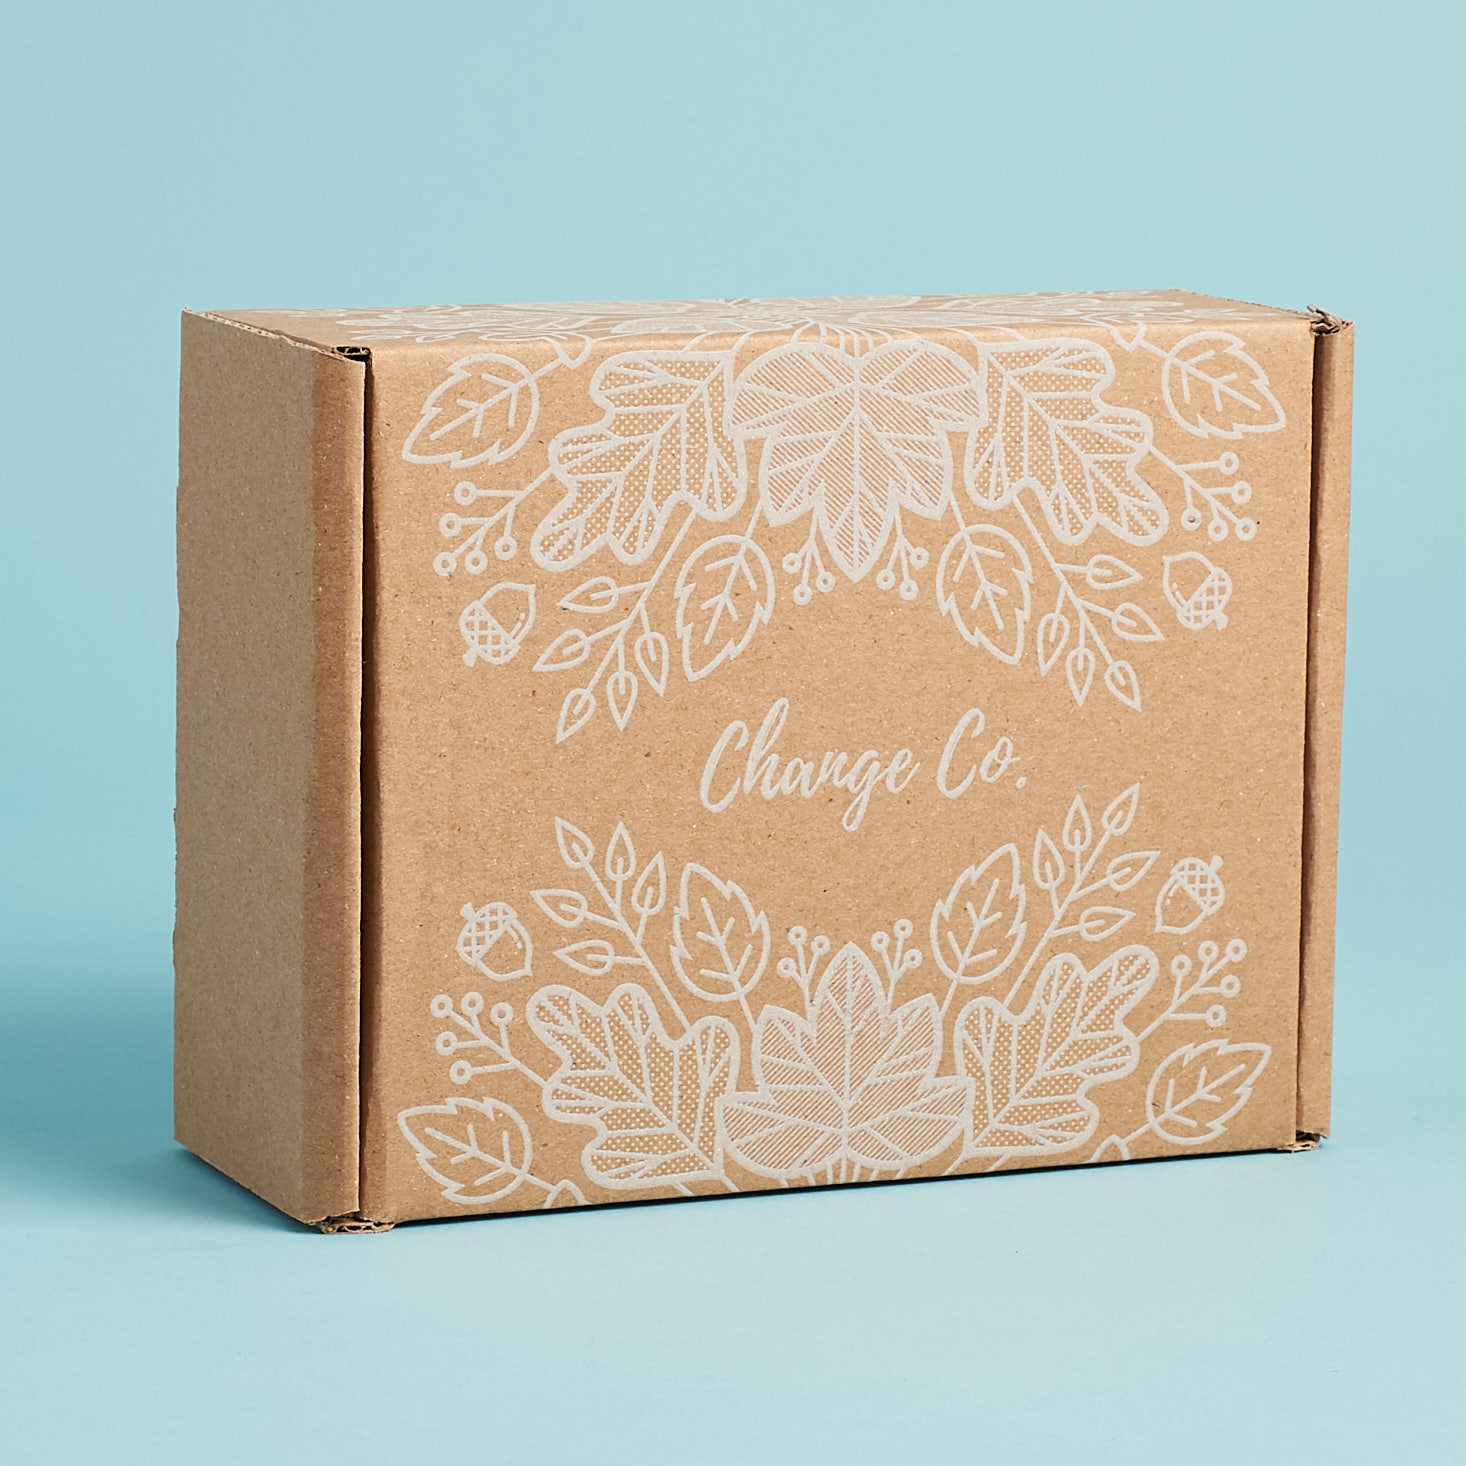 Change Co Spring Box Review + Coupon – March 2018